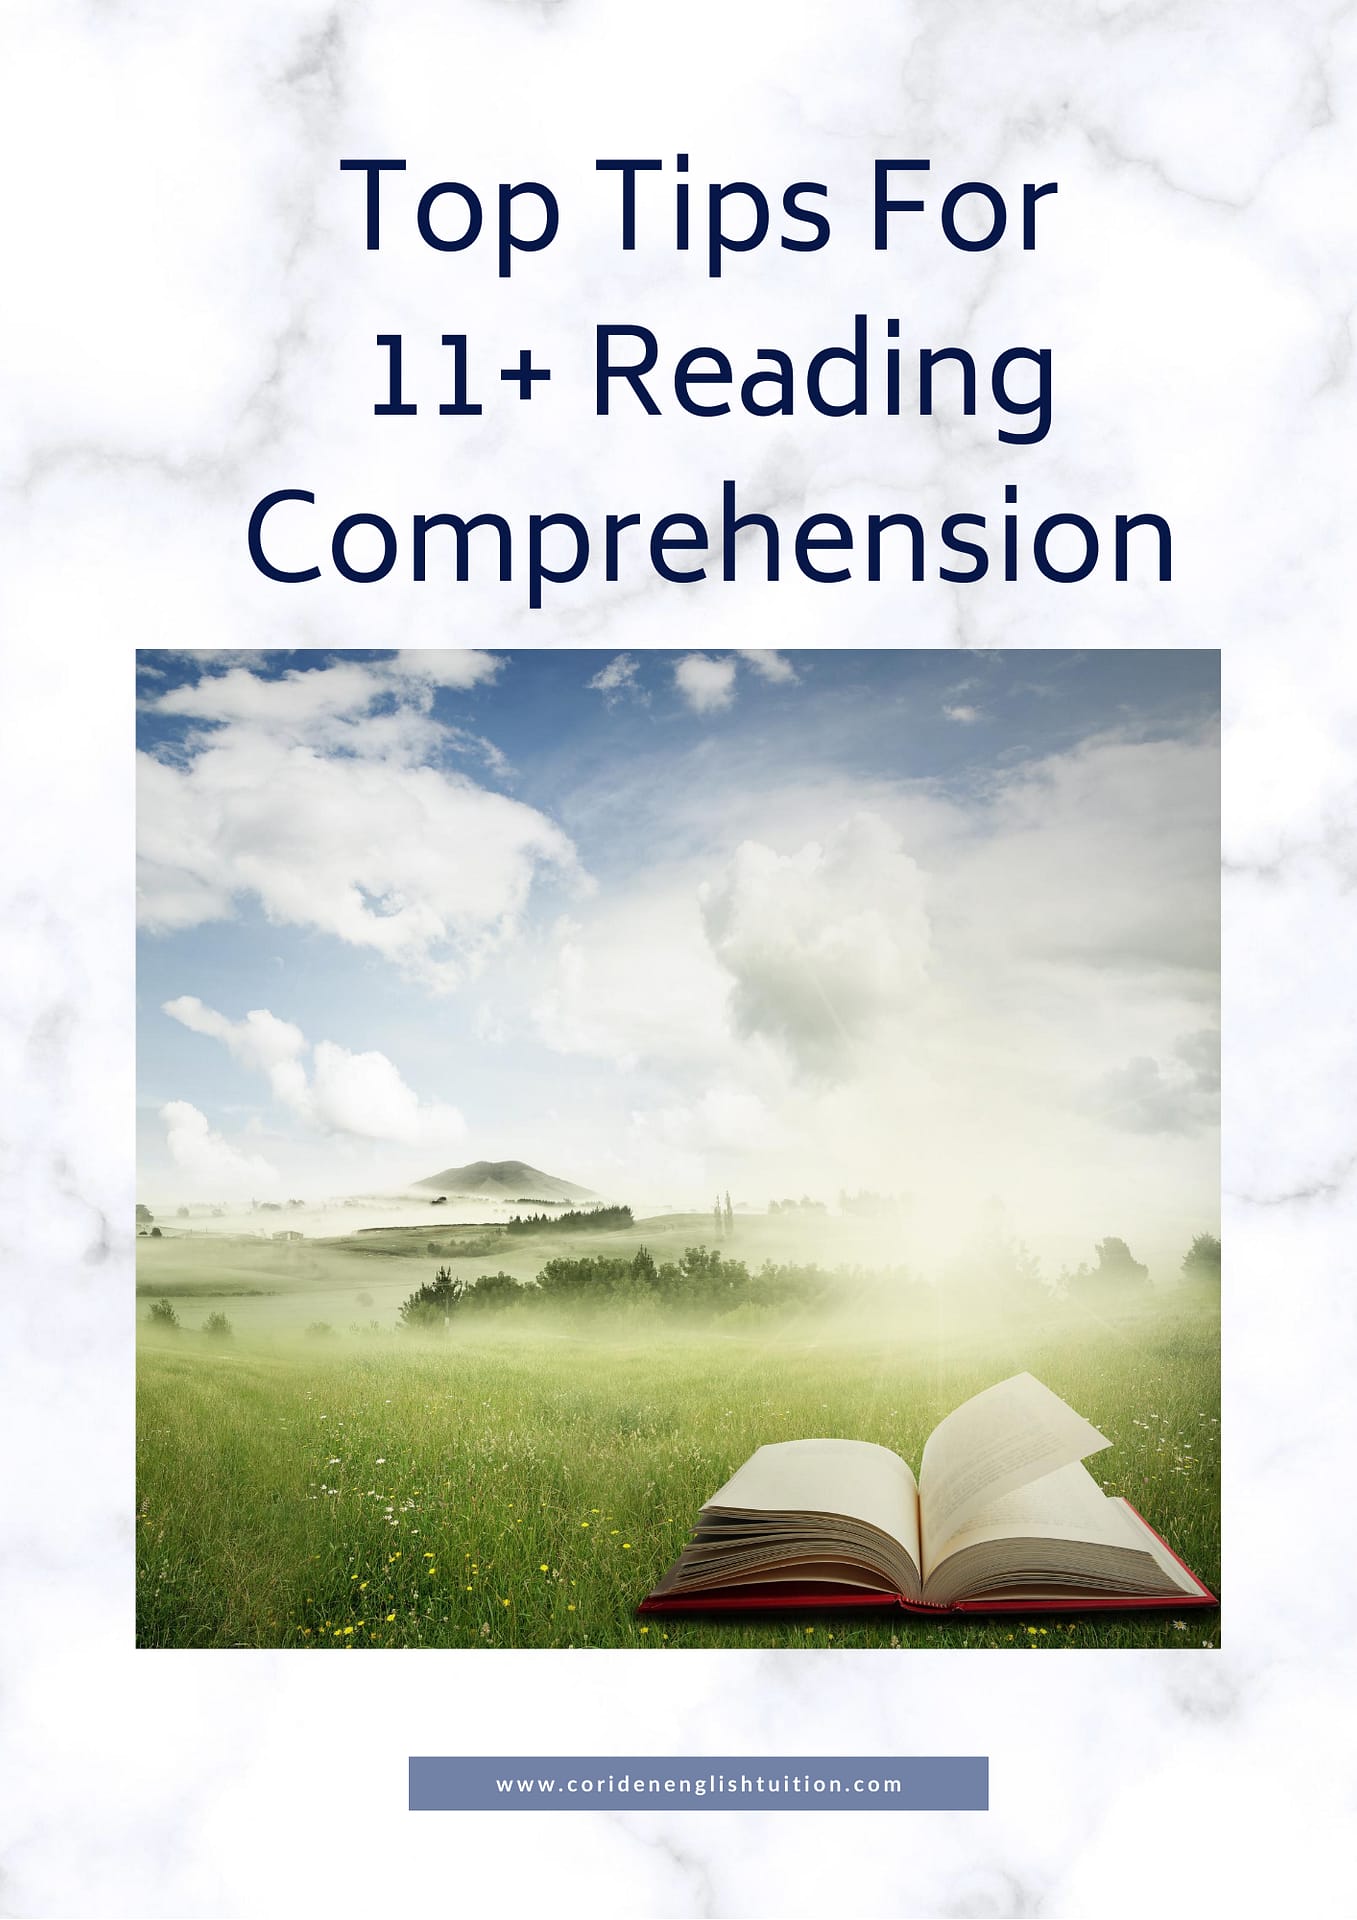 TOP TIPS FOR 11+ READING COMPREHENSION